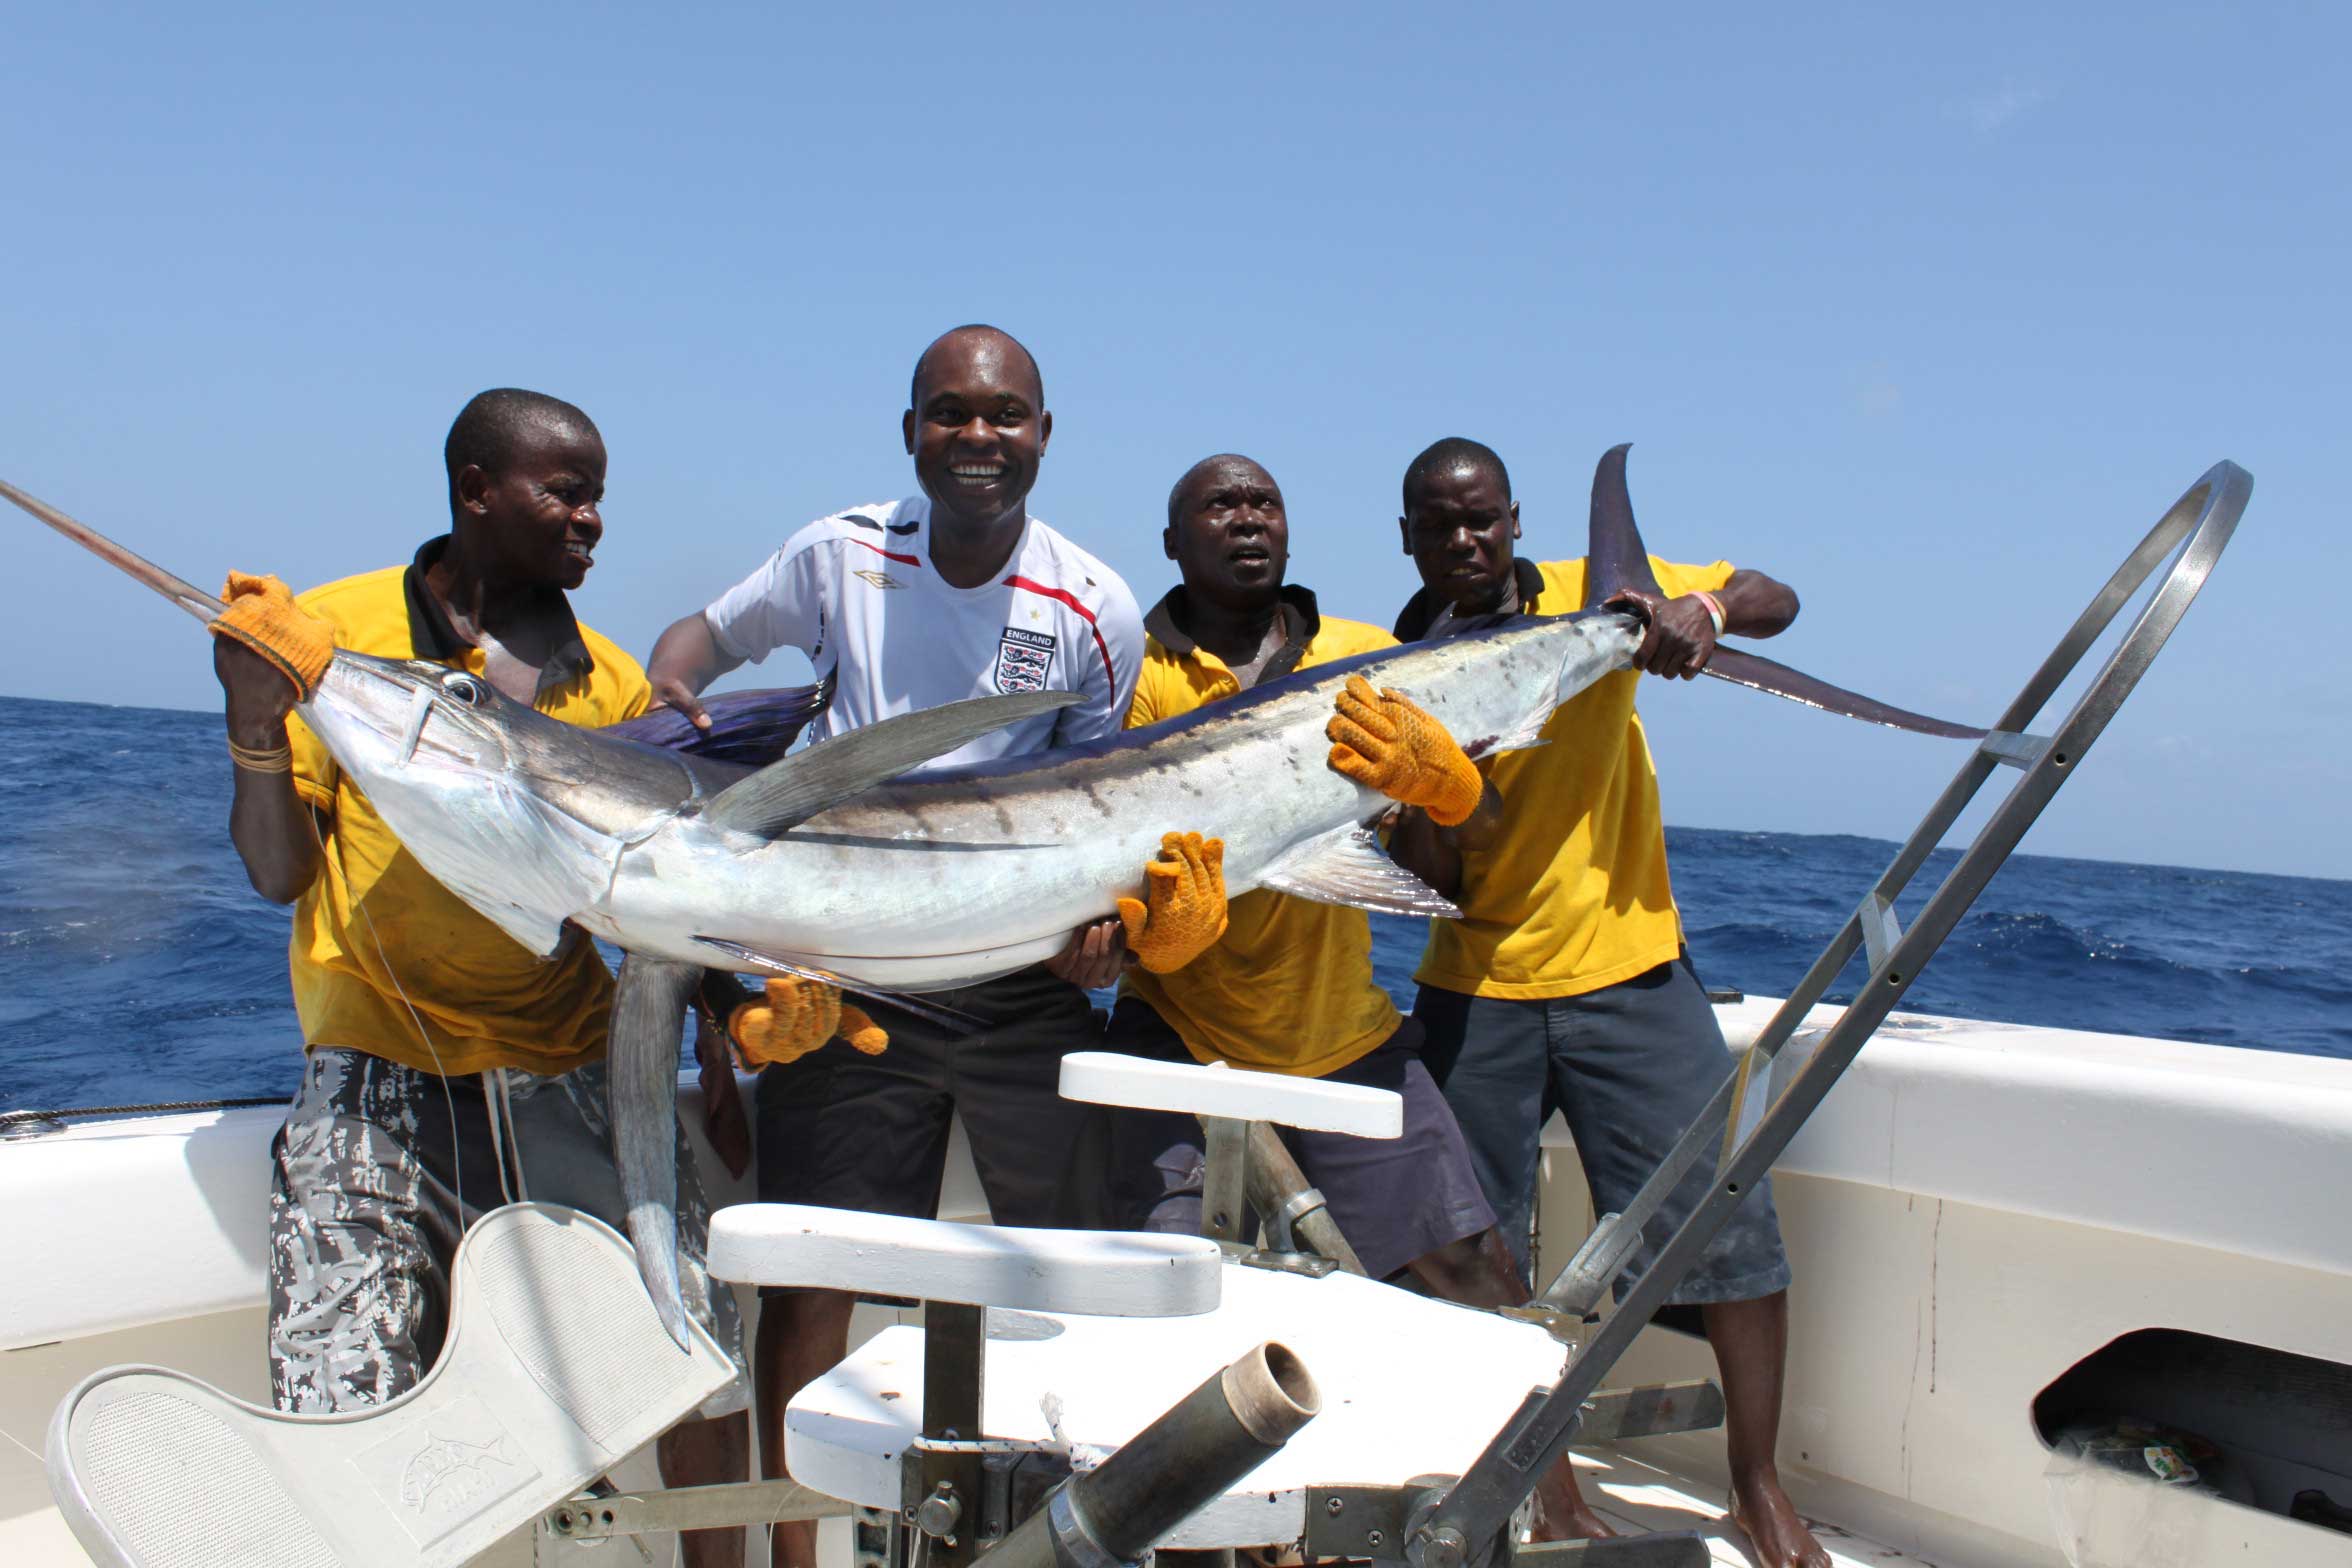 Tanzania: GCRF Promotes Fishery System in the Indian Ocean Island of Pemba